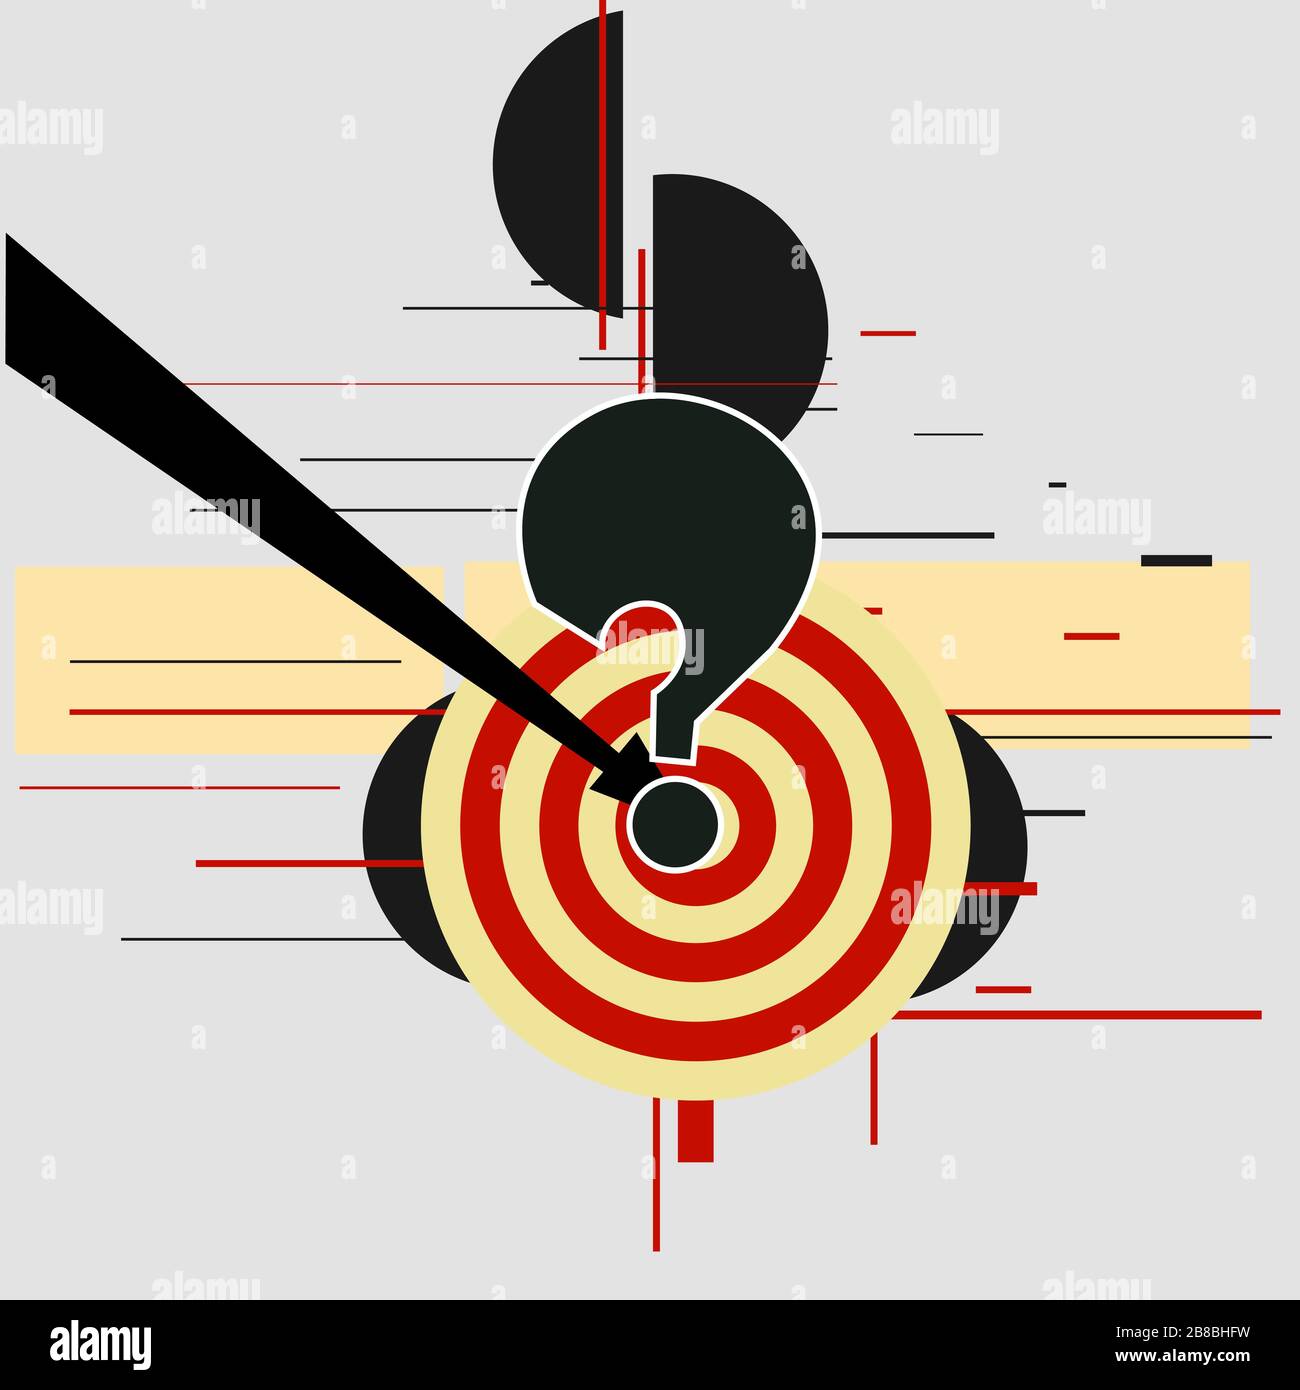 Vector abstract black and red shapes Constructivism Art style design. Geometric figures creates futuristic compostion with target. Minimalistic modern Stock Vector